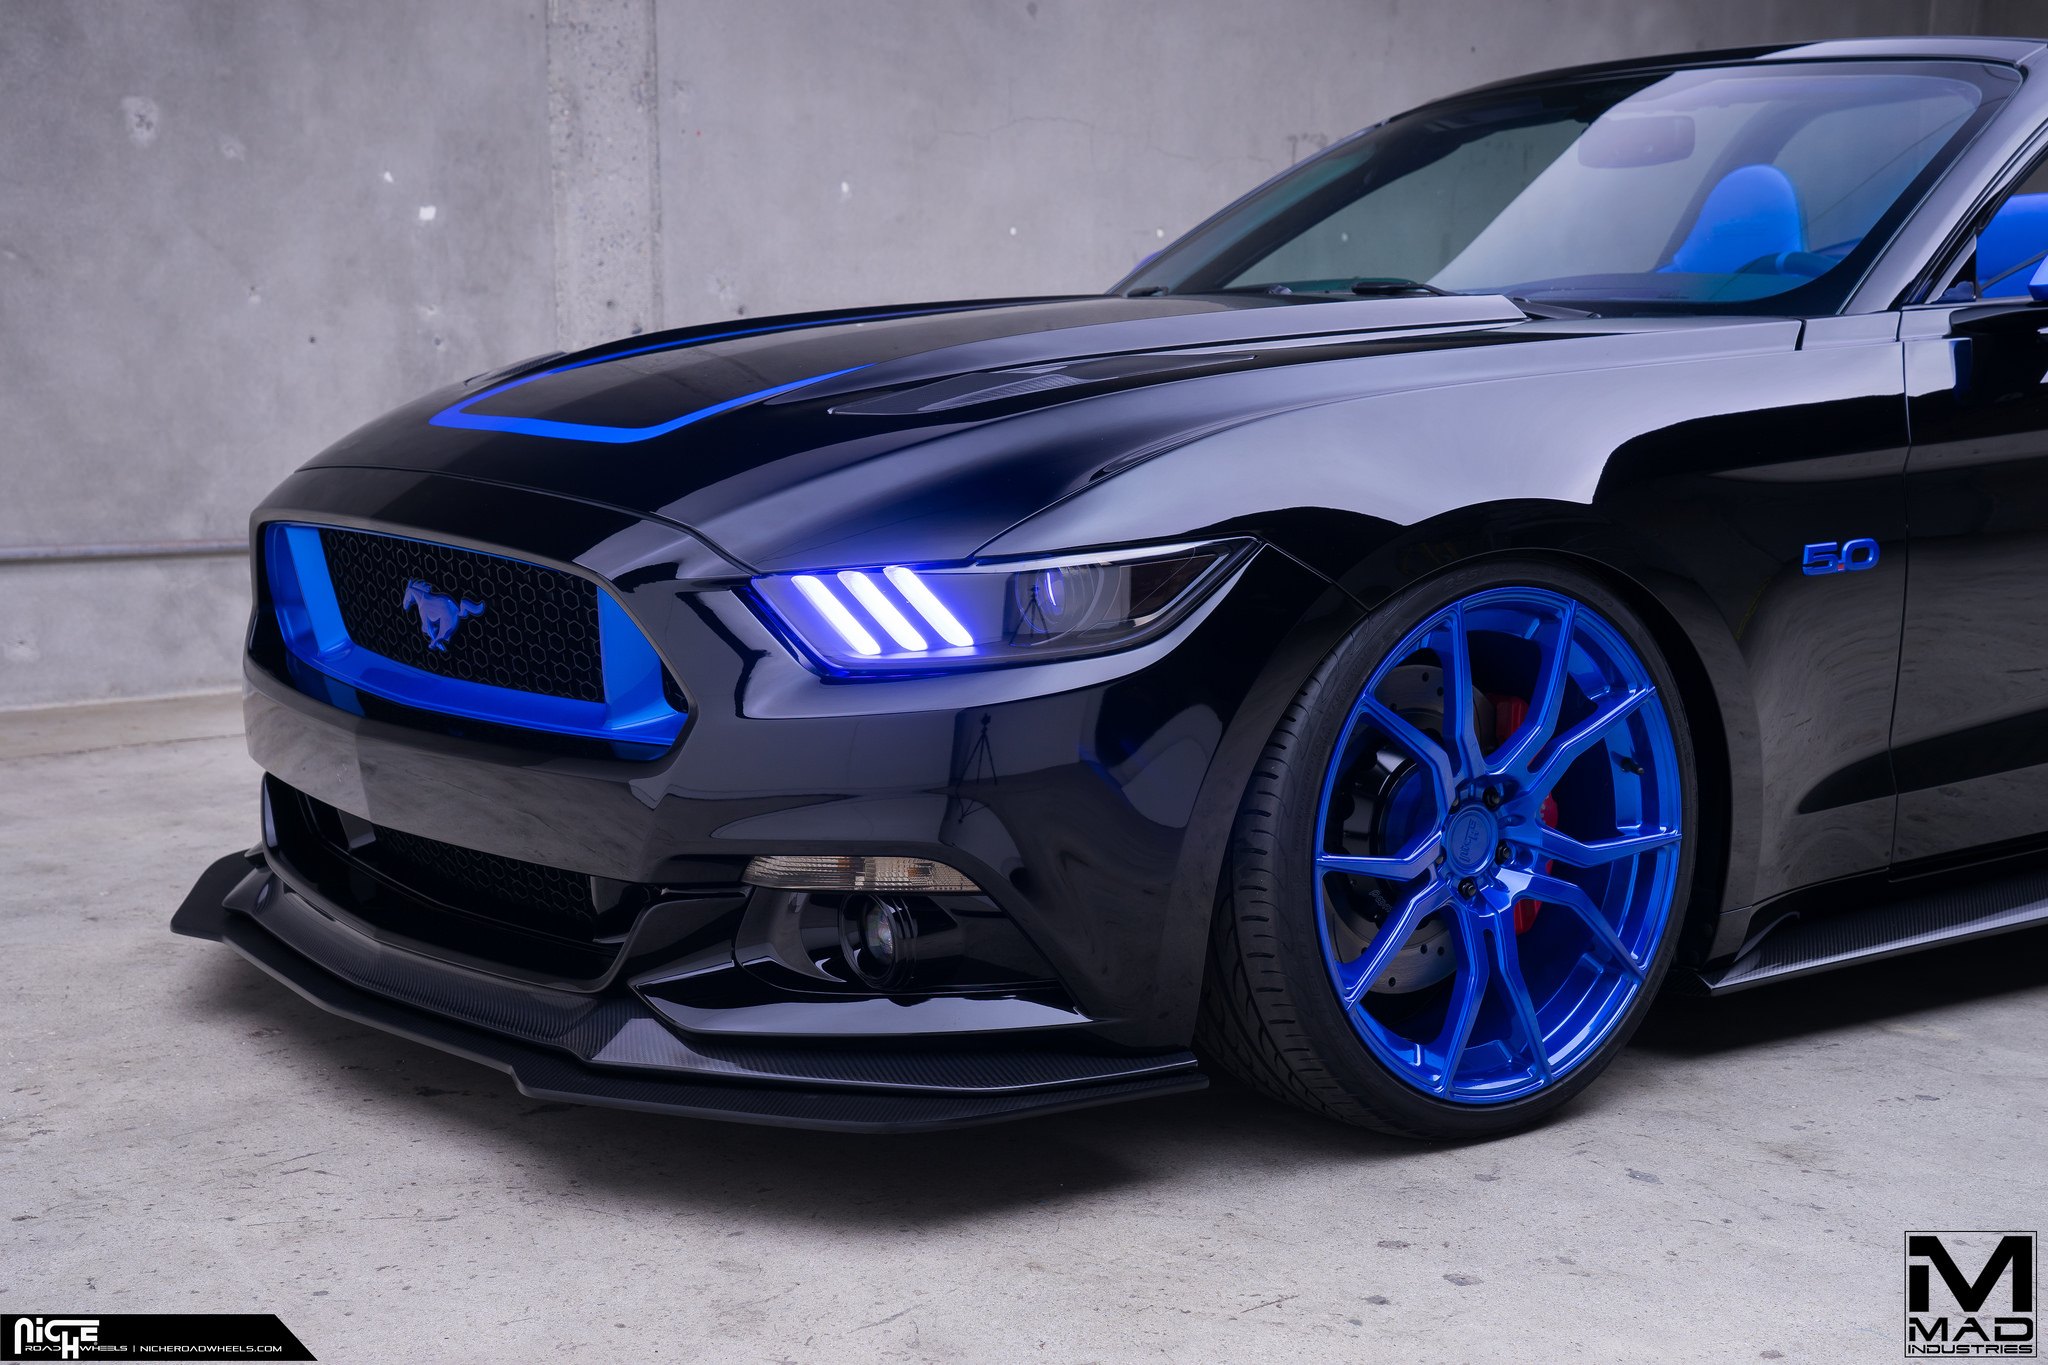 Blue LED headlights on Ford Mustang GT - Photo by MAD Industries